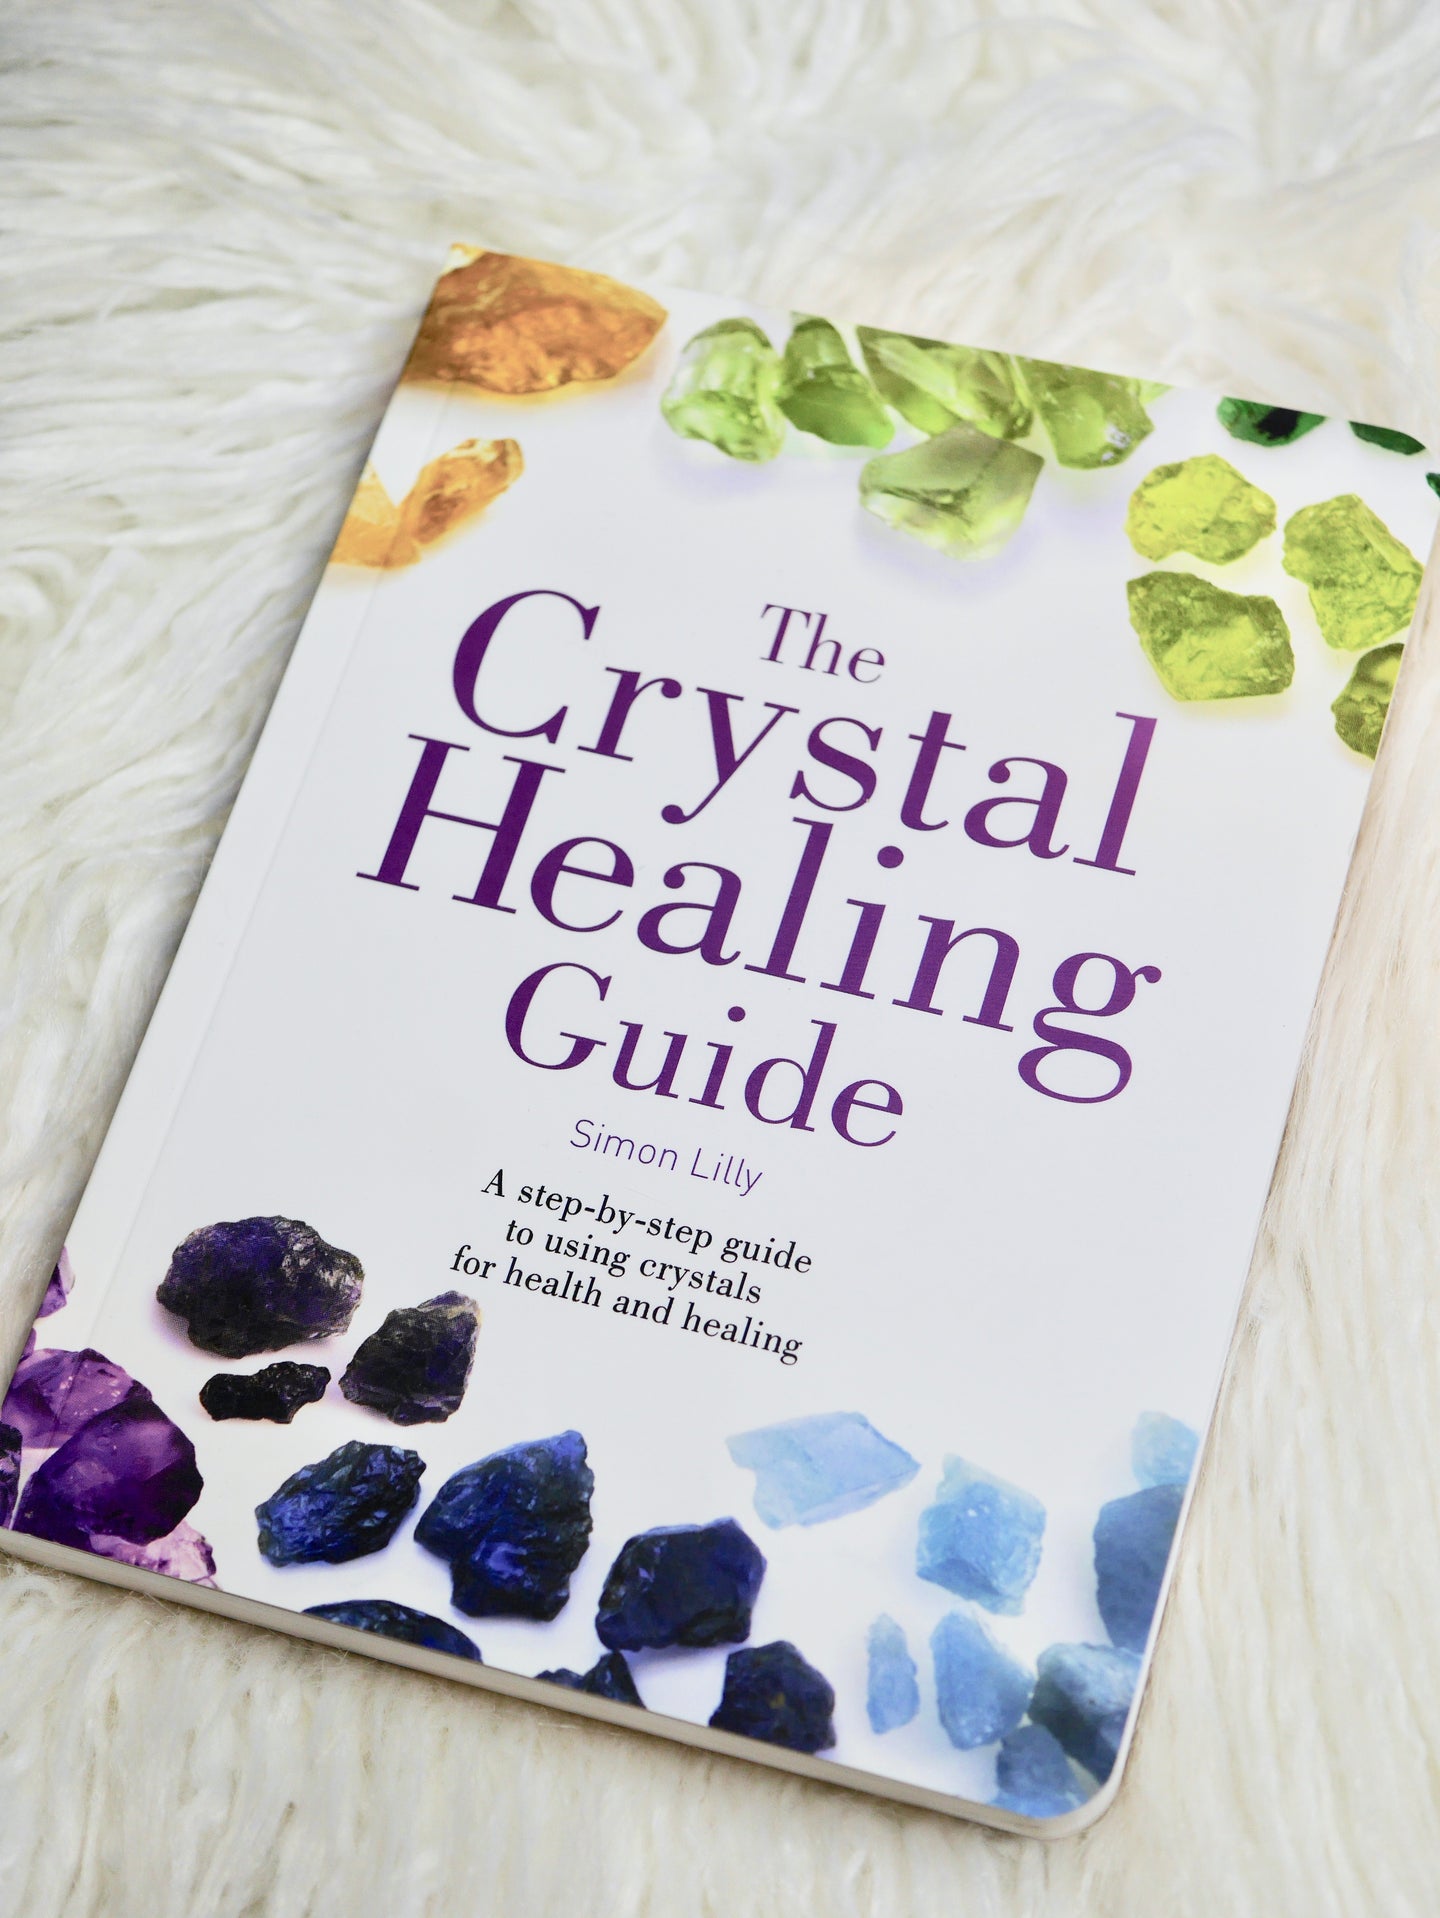 The Crystal Healing Guide